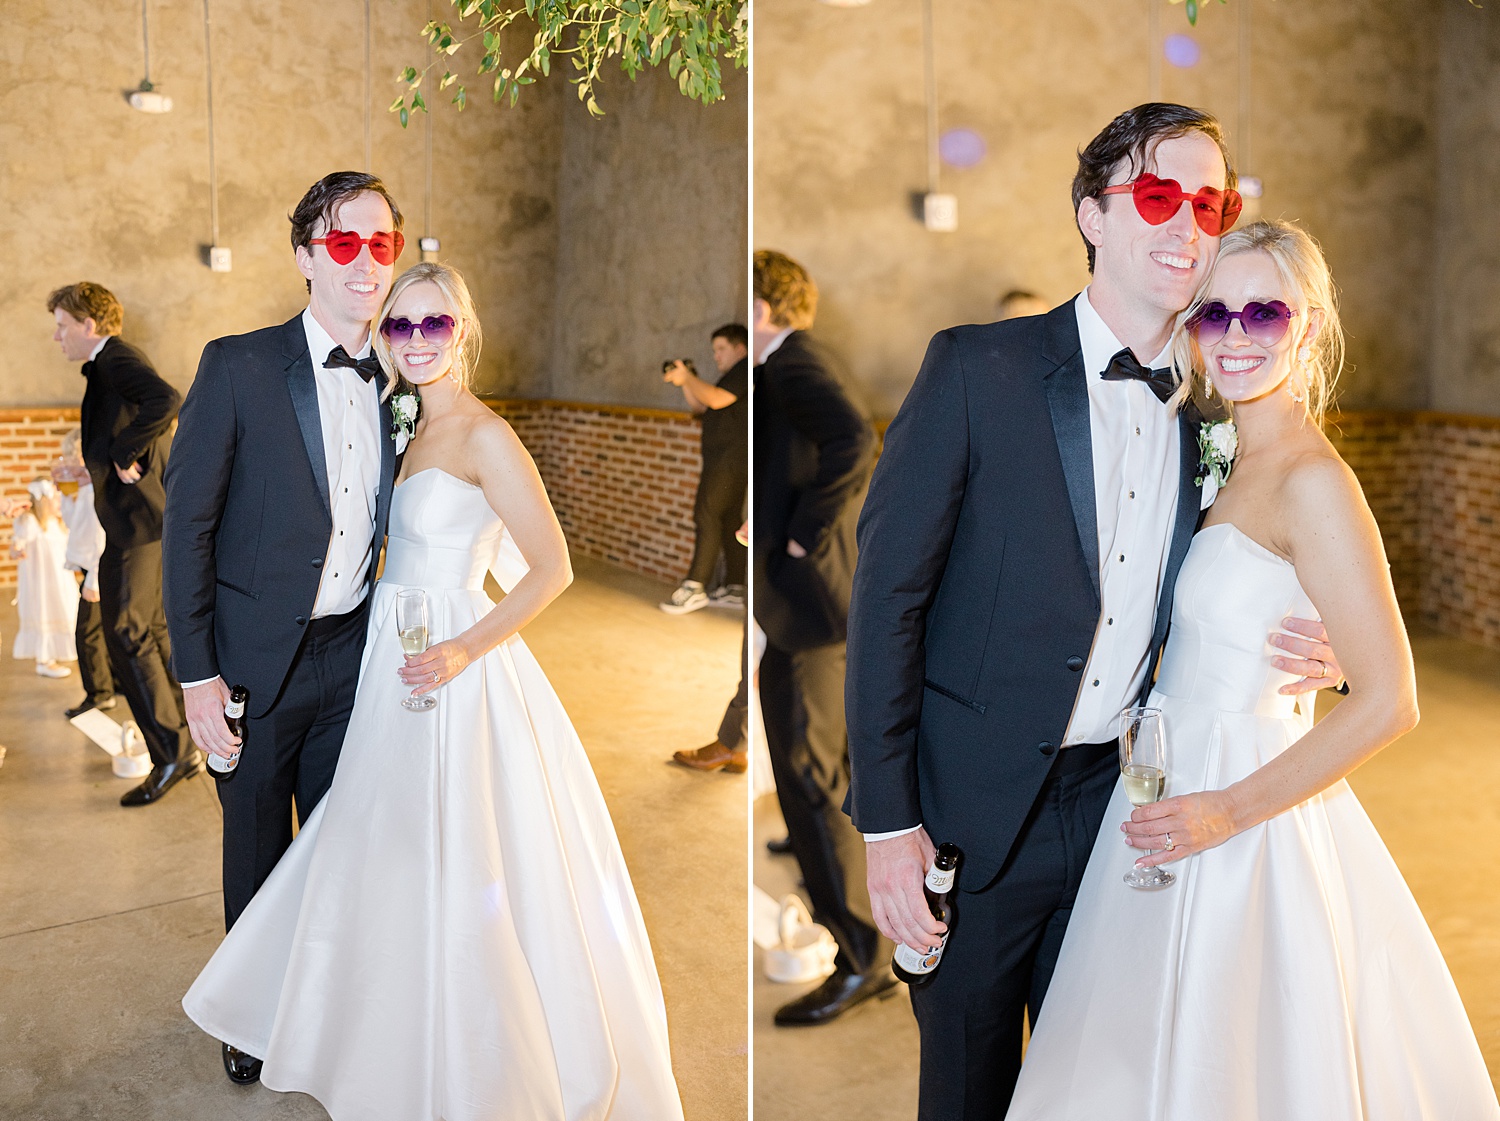 newlyweds at reception with fun sunglasses 